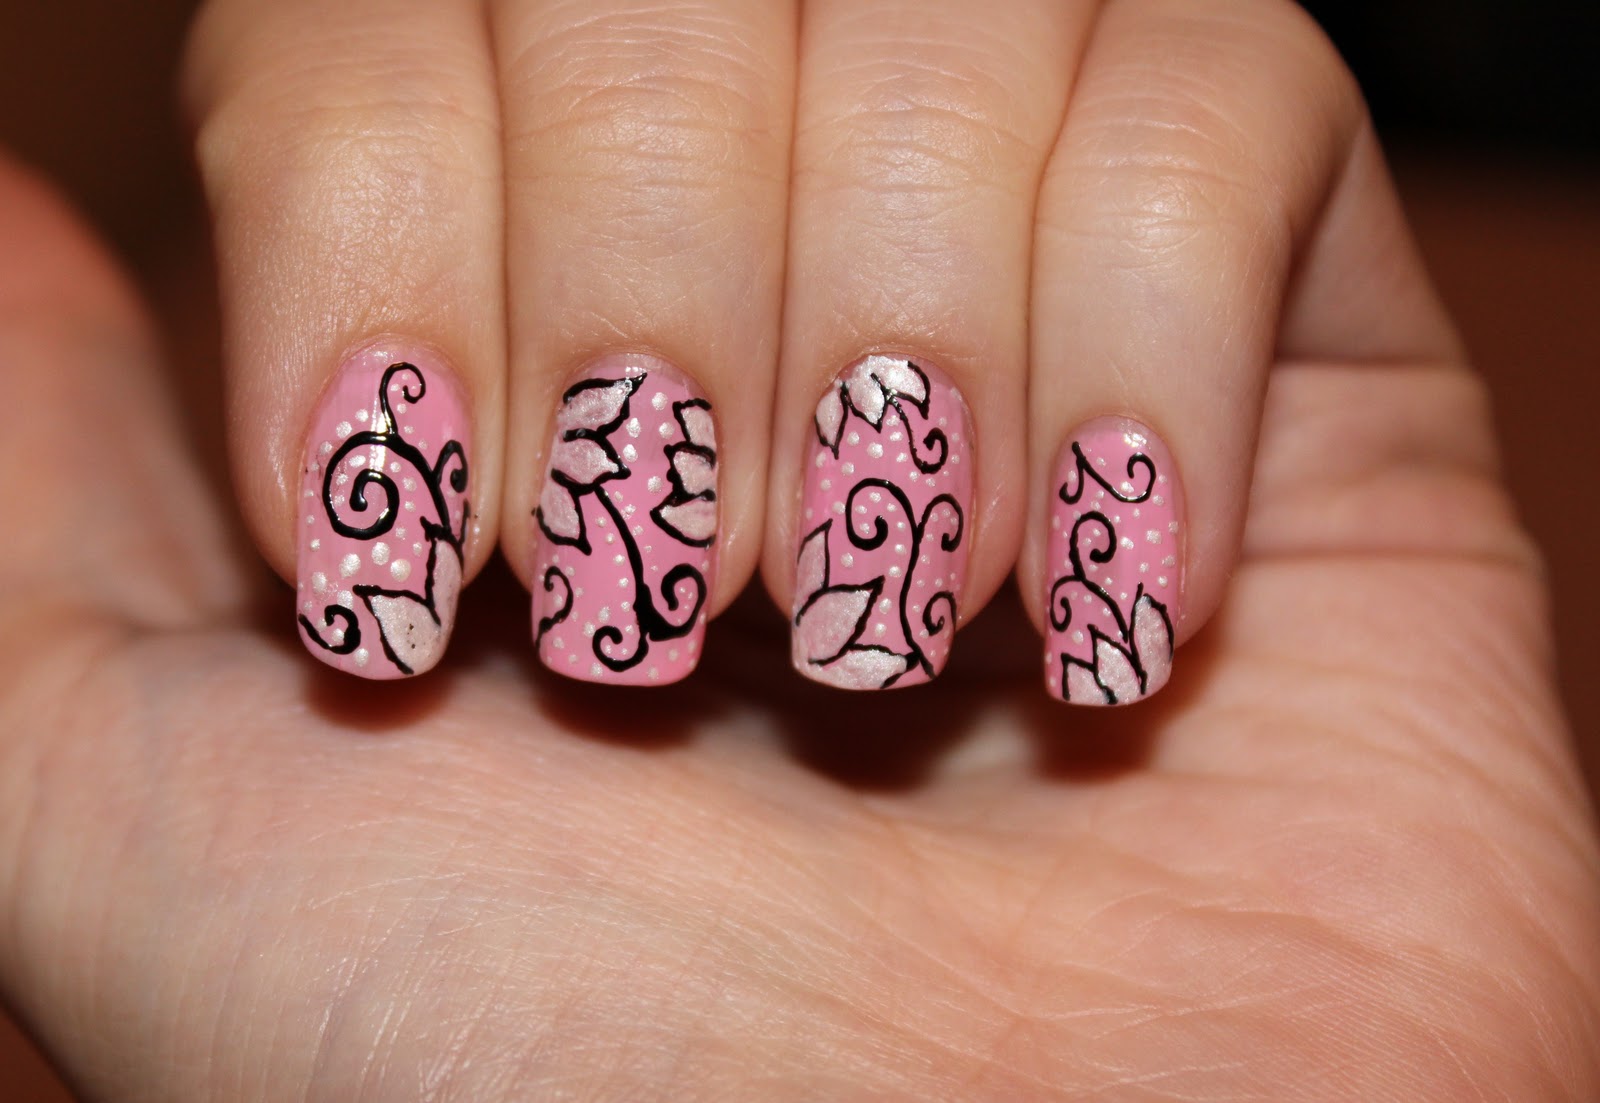 5. Step-by-Step Nail Art Tutorials for Beginners - wide 5